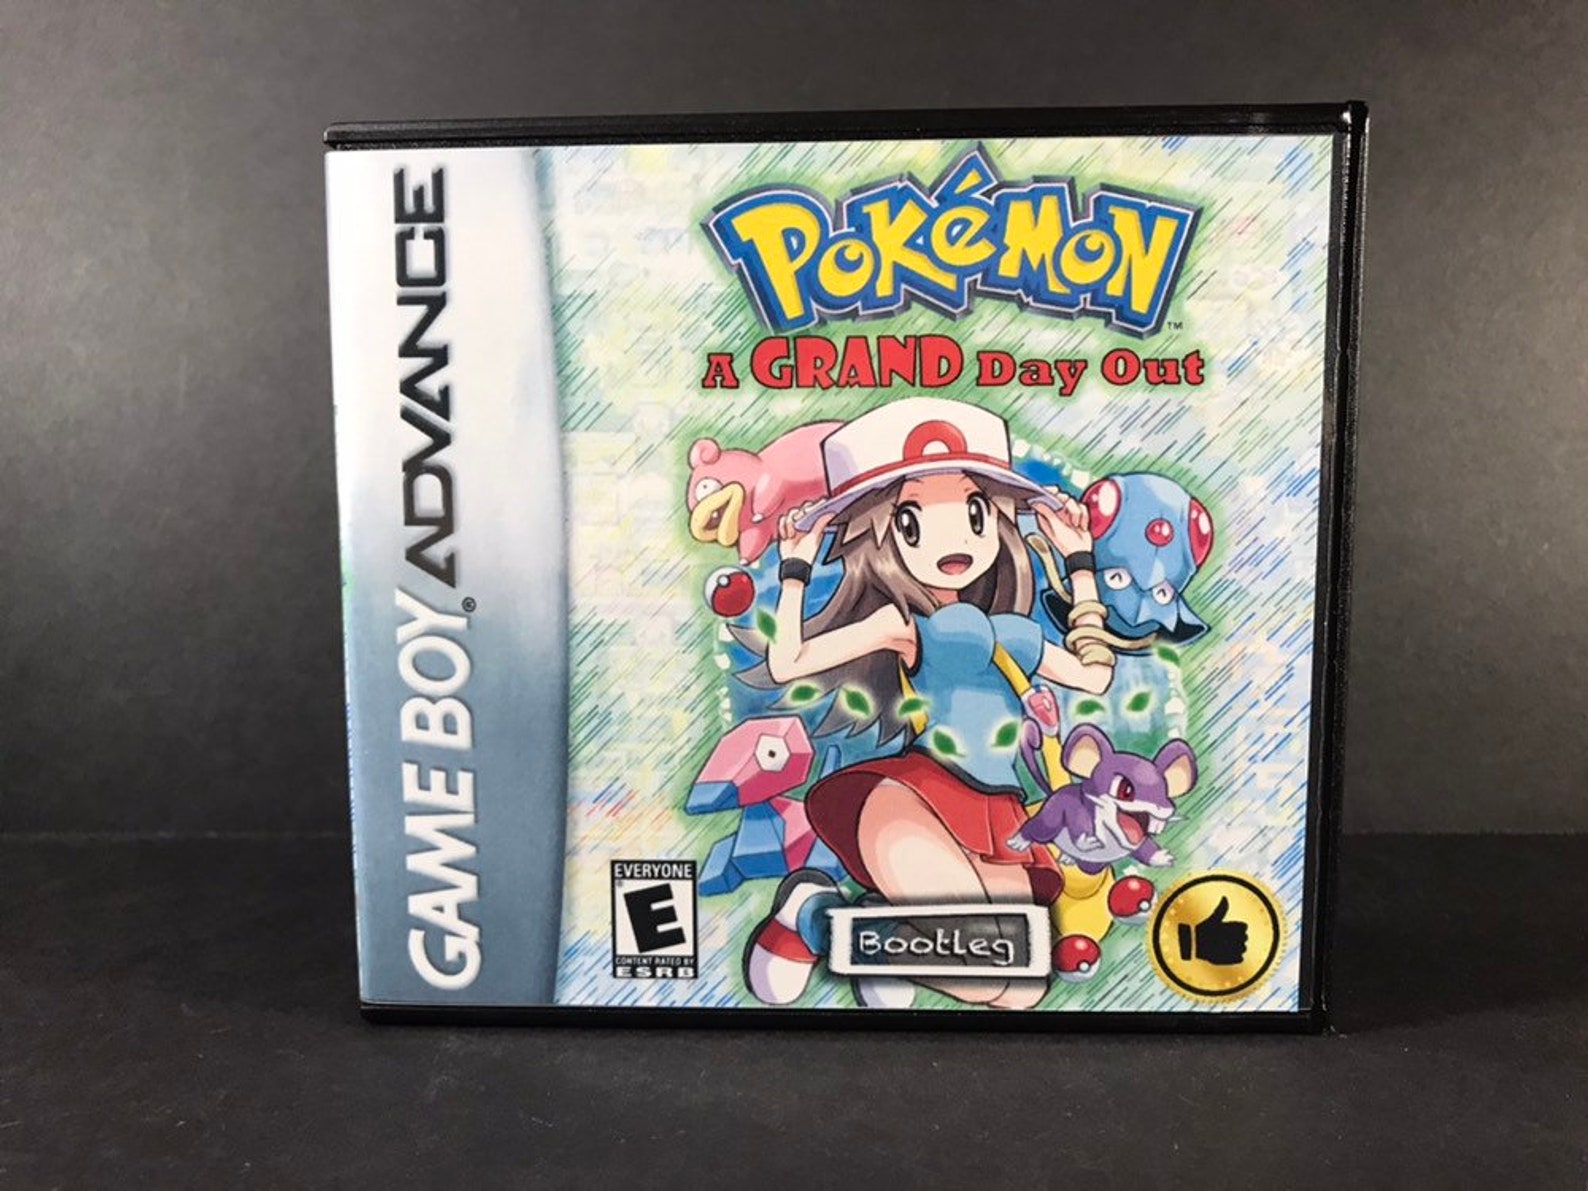 Pokemon A Grand Day Out ROM Hack Fan Made Game Gameboy Advance image 0.